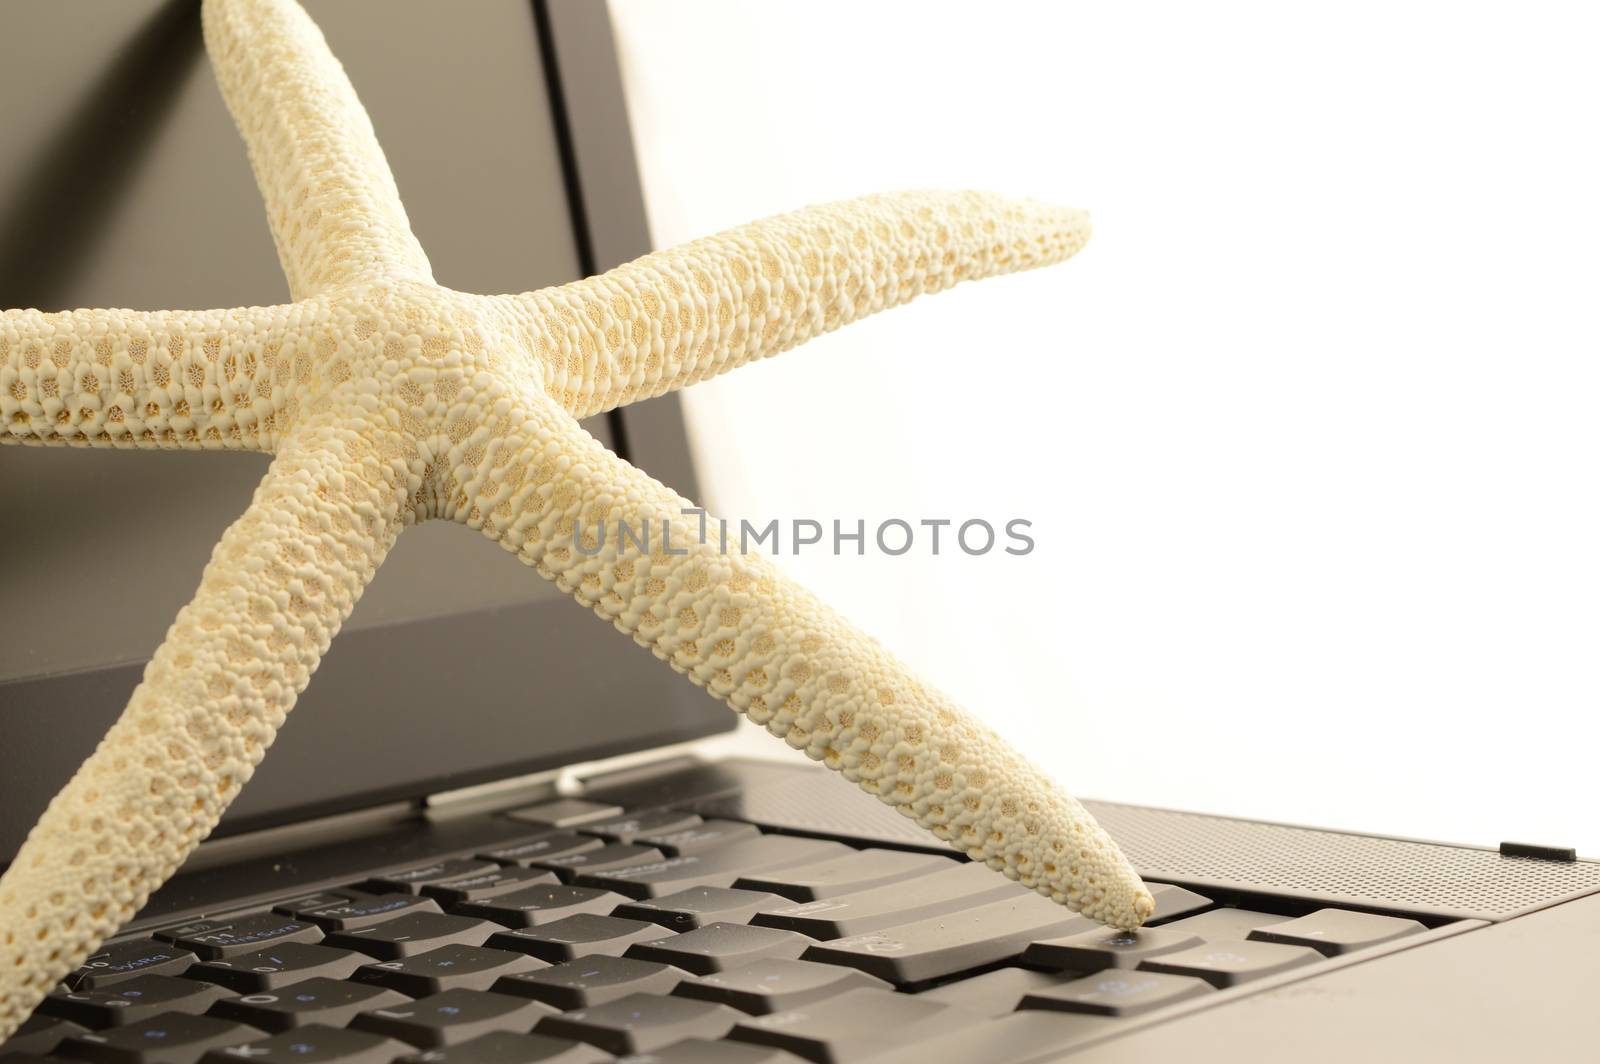 A starfish on a laptop for online travel bookings.